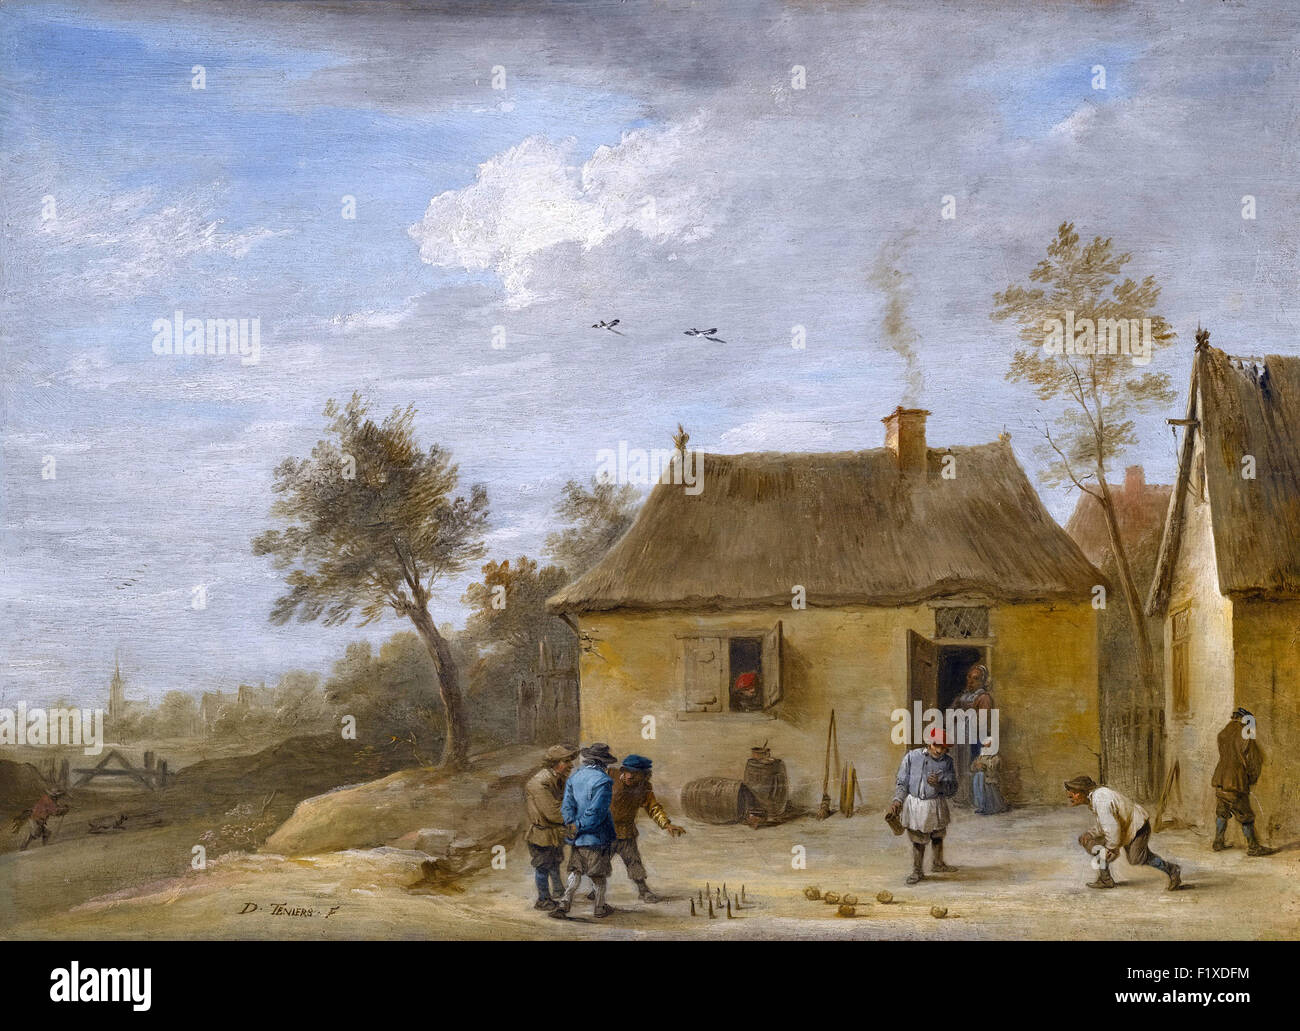 David Teniers the Younger - Landscape with Figures Playing Skittles Stock Photo